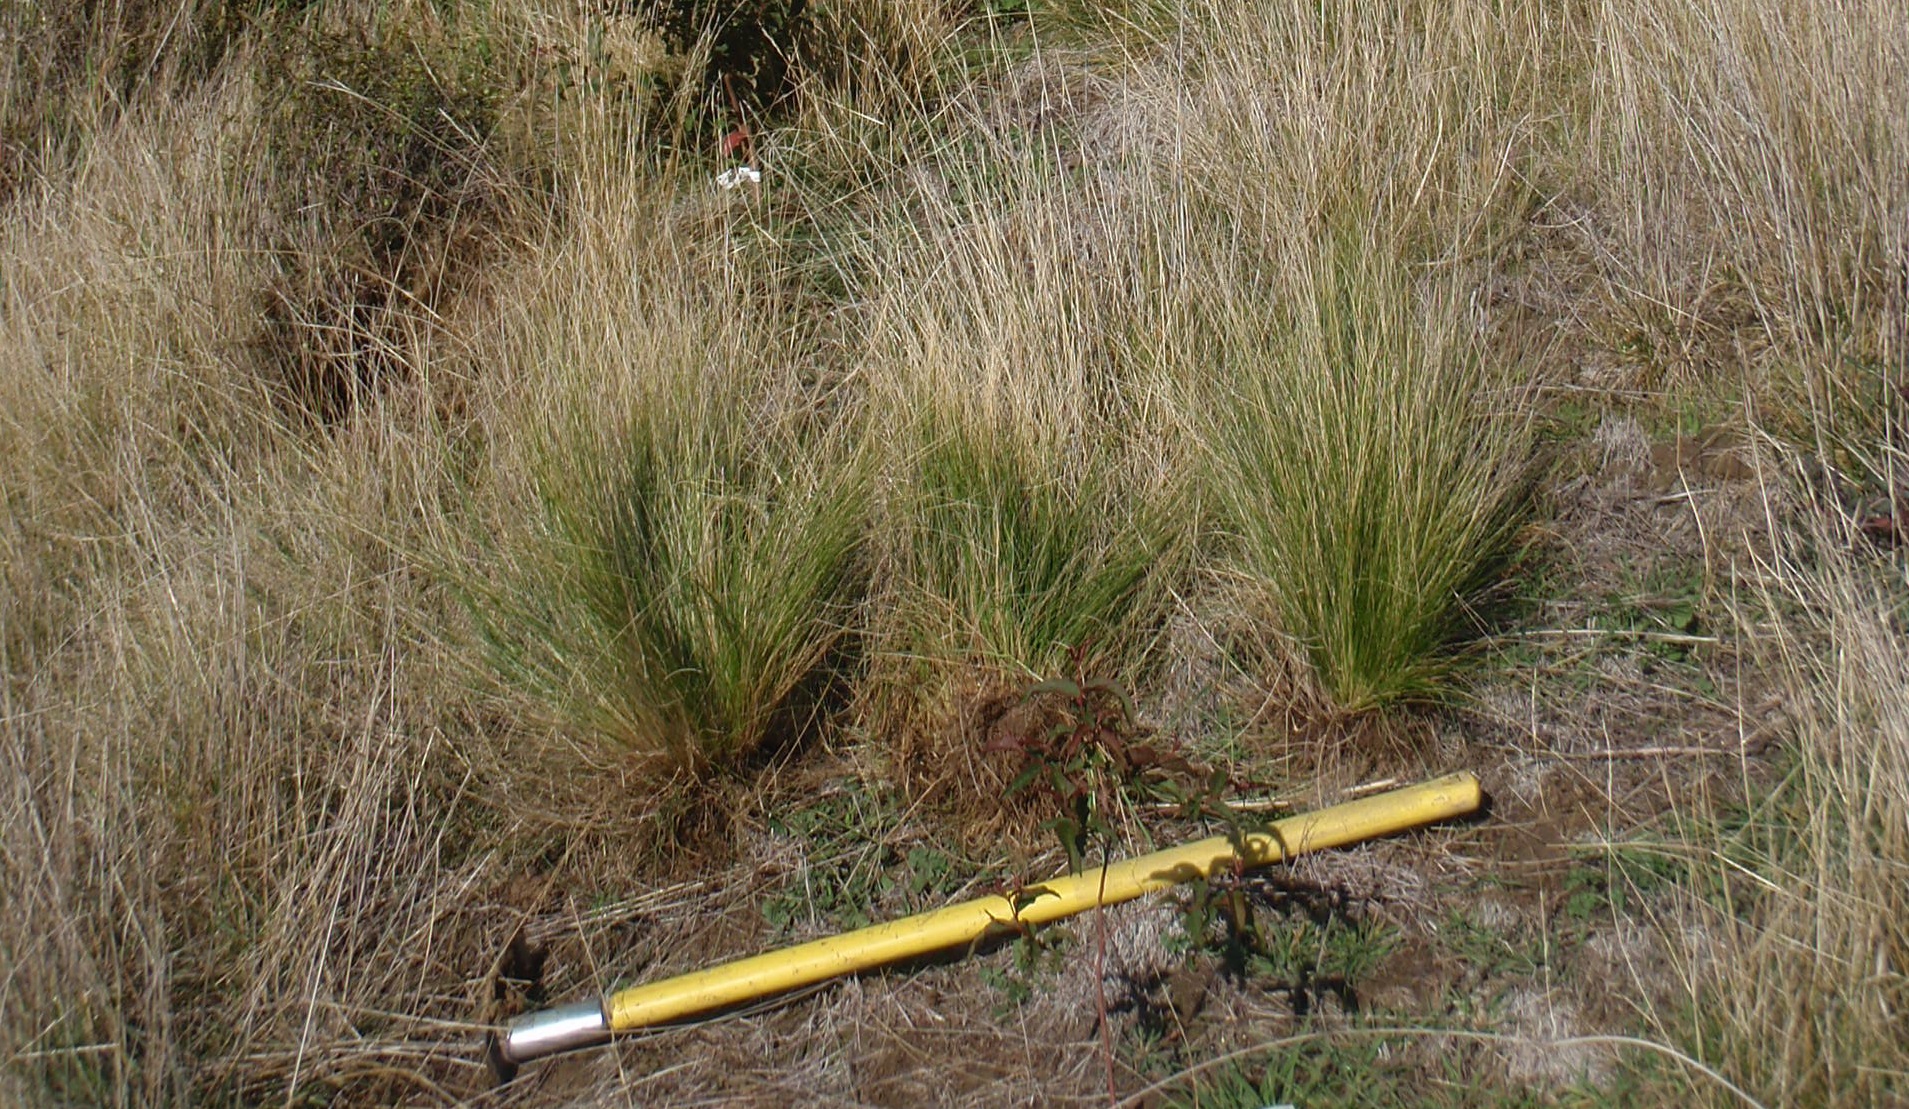 Young ‘nest’ of Nassella Tussock plants. 